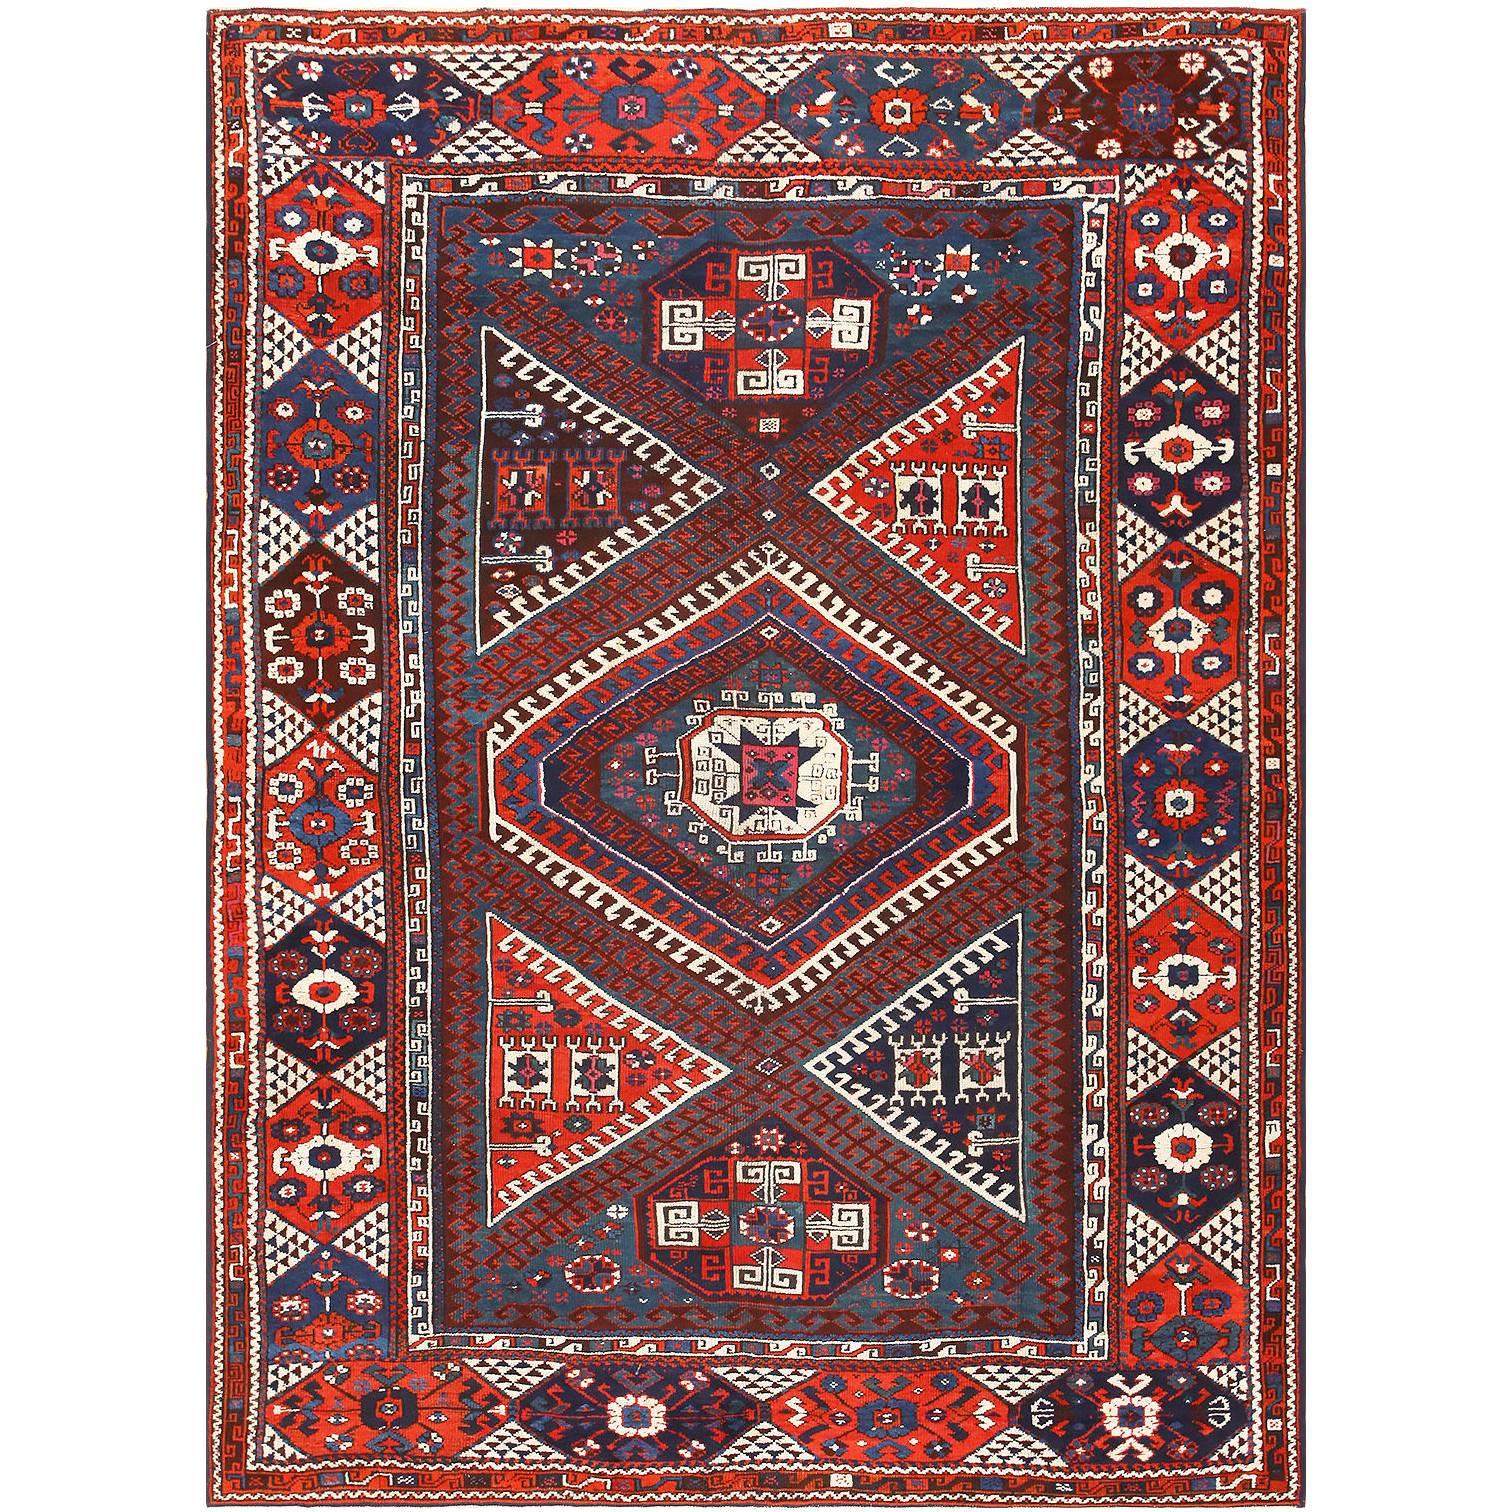 Collectible Tribal Antique Turkish Bergama Rug. Size: 7 ft x 9 ft 7 in